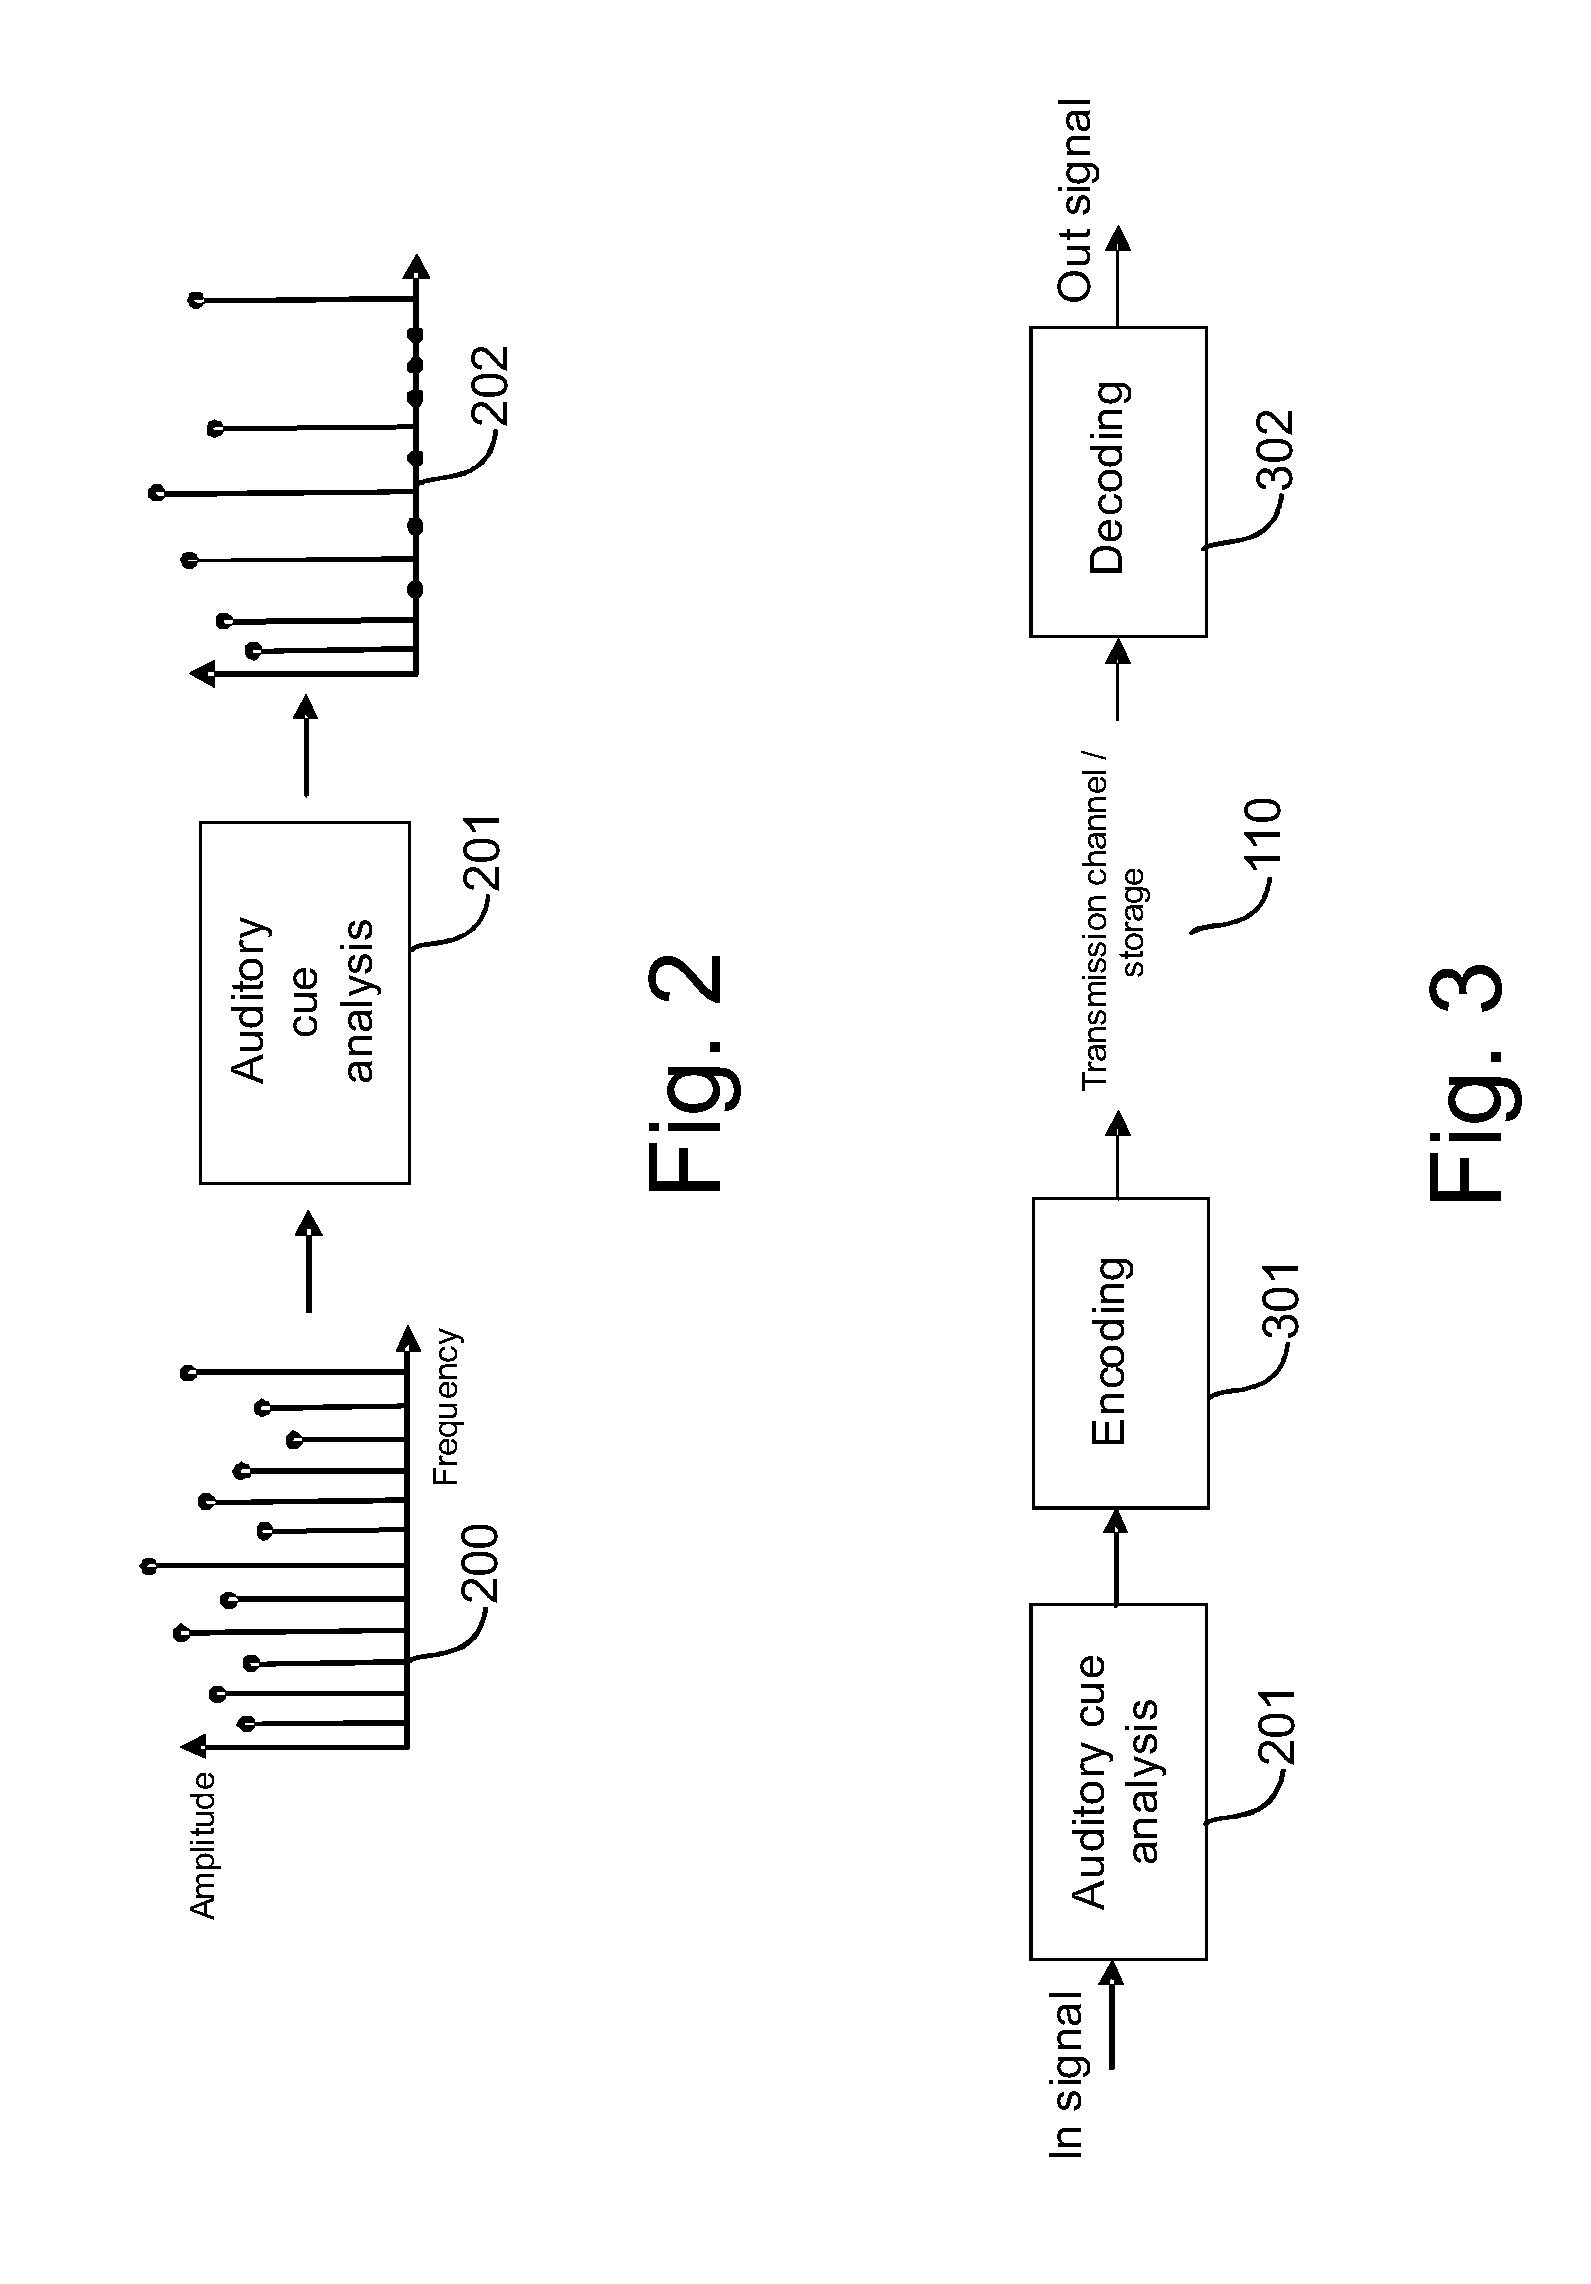 Method, Apparatus and Computer Program for Processing Multi-Channel Signals